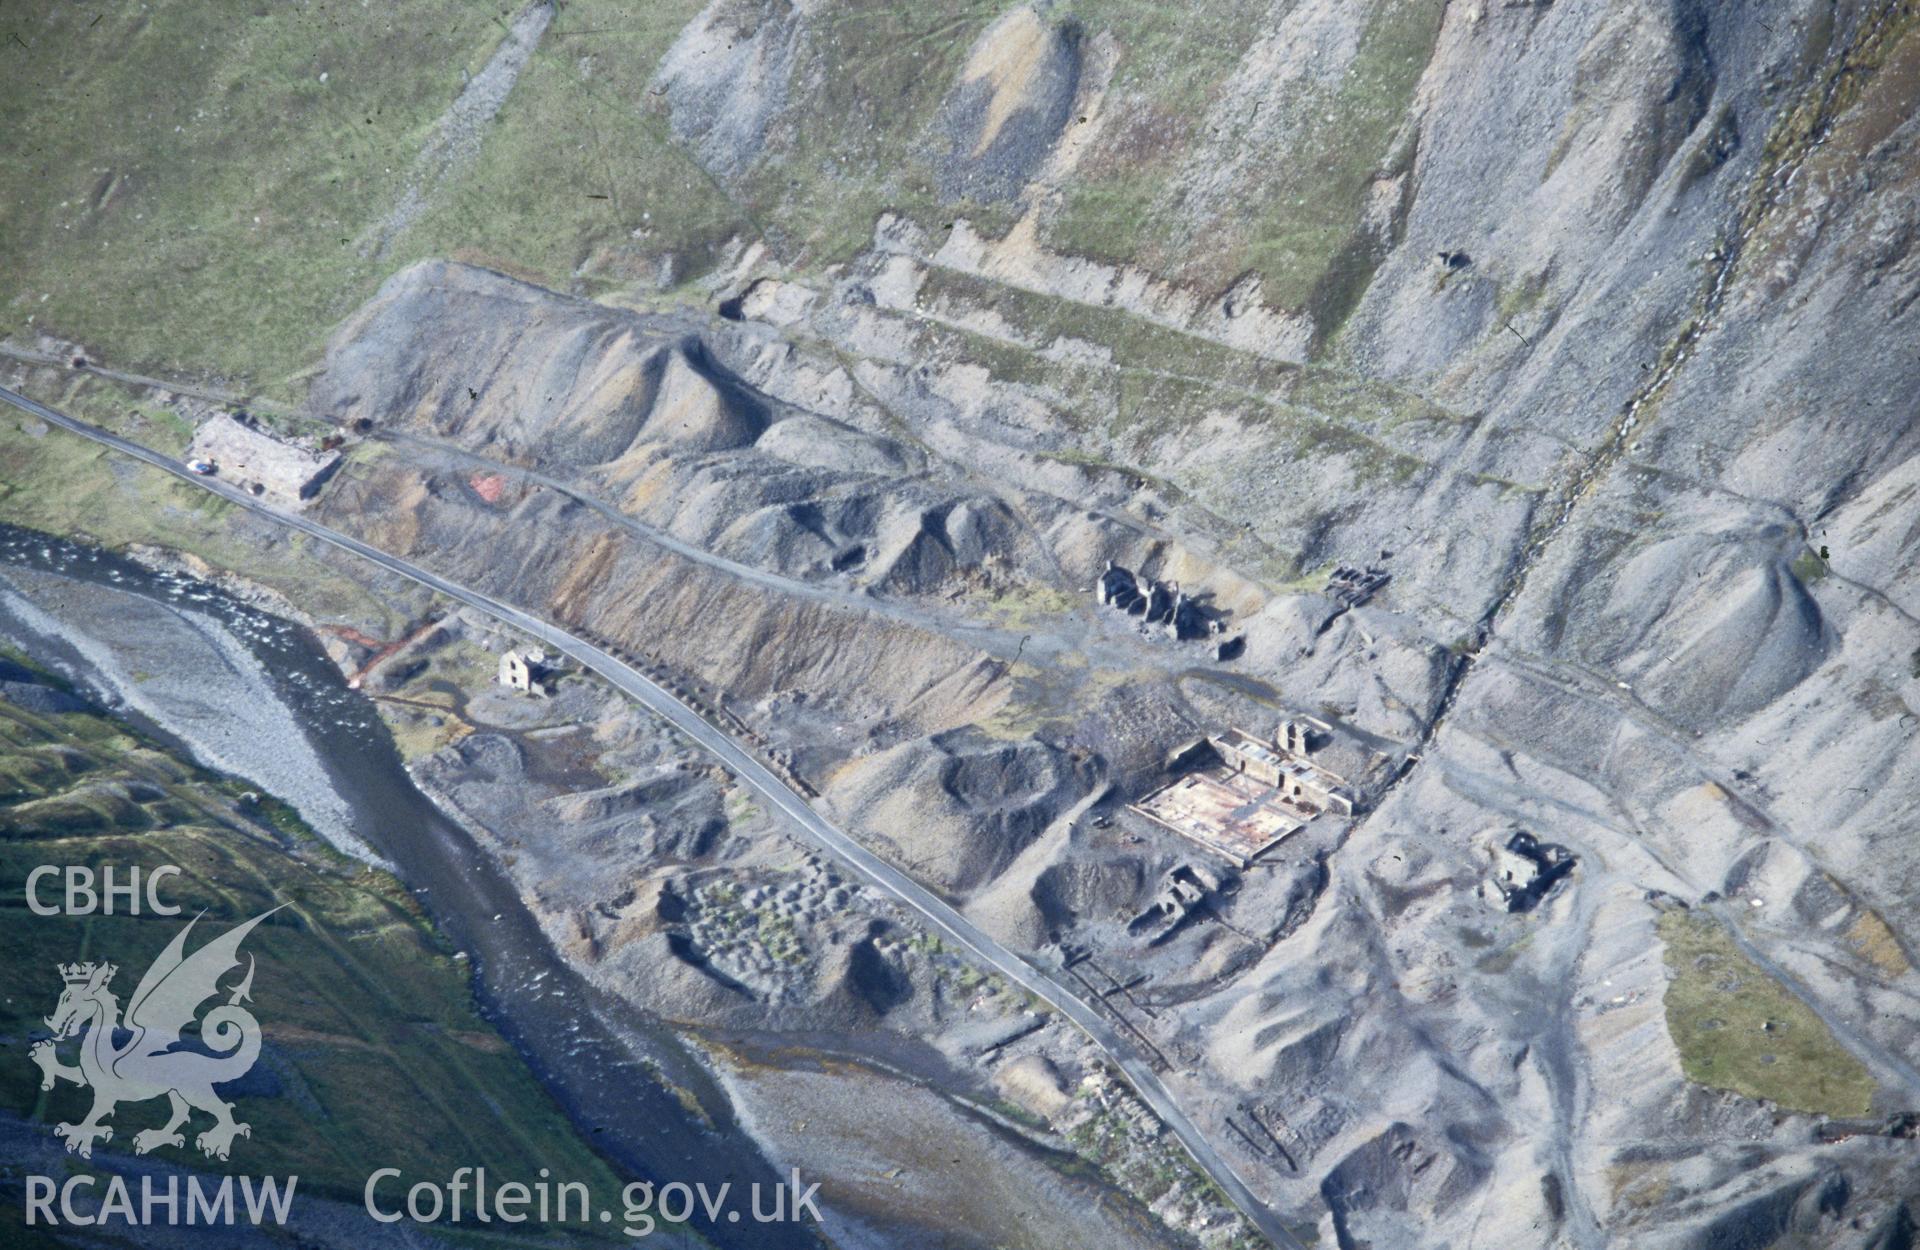 Slide of RCAHMW colour oblique aerial photograph of Cwmystwyth Lead Mines, taken by C.R. Musson, 29/10/1992.